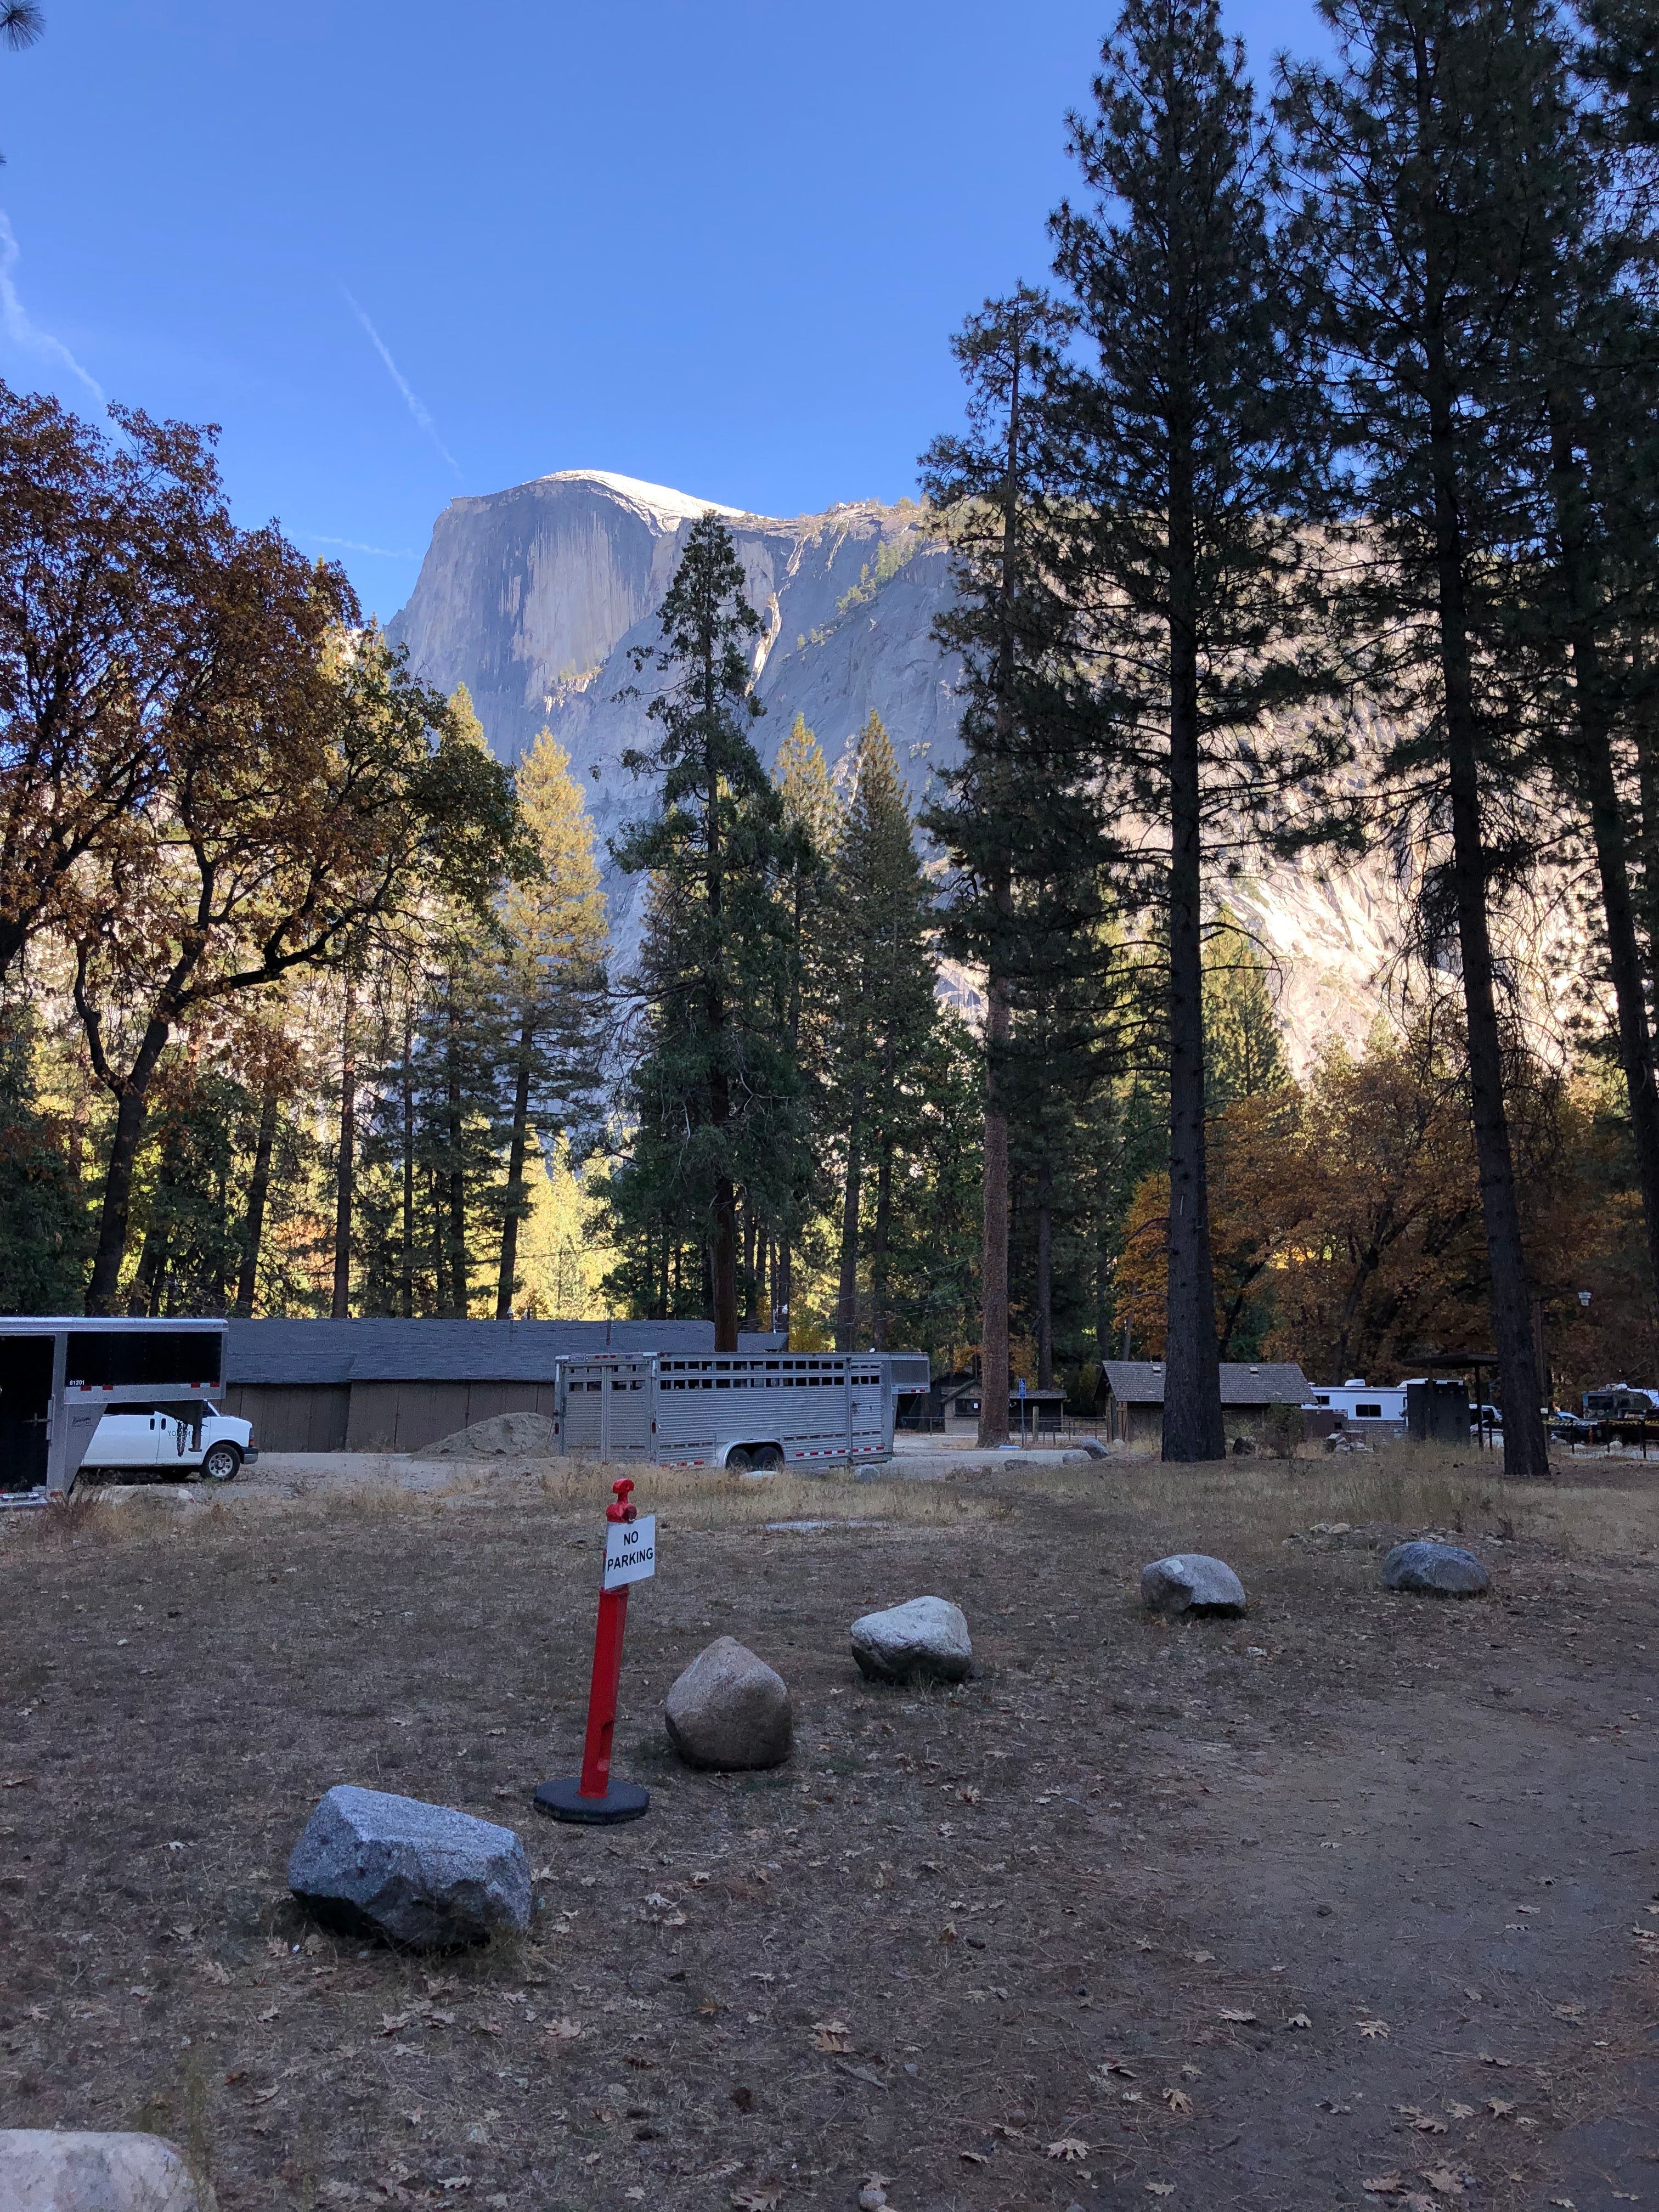 The stables next to North Pines. Half Dome in the background.